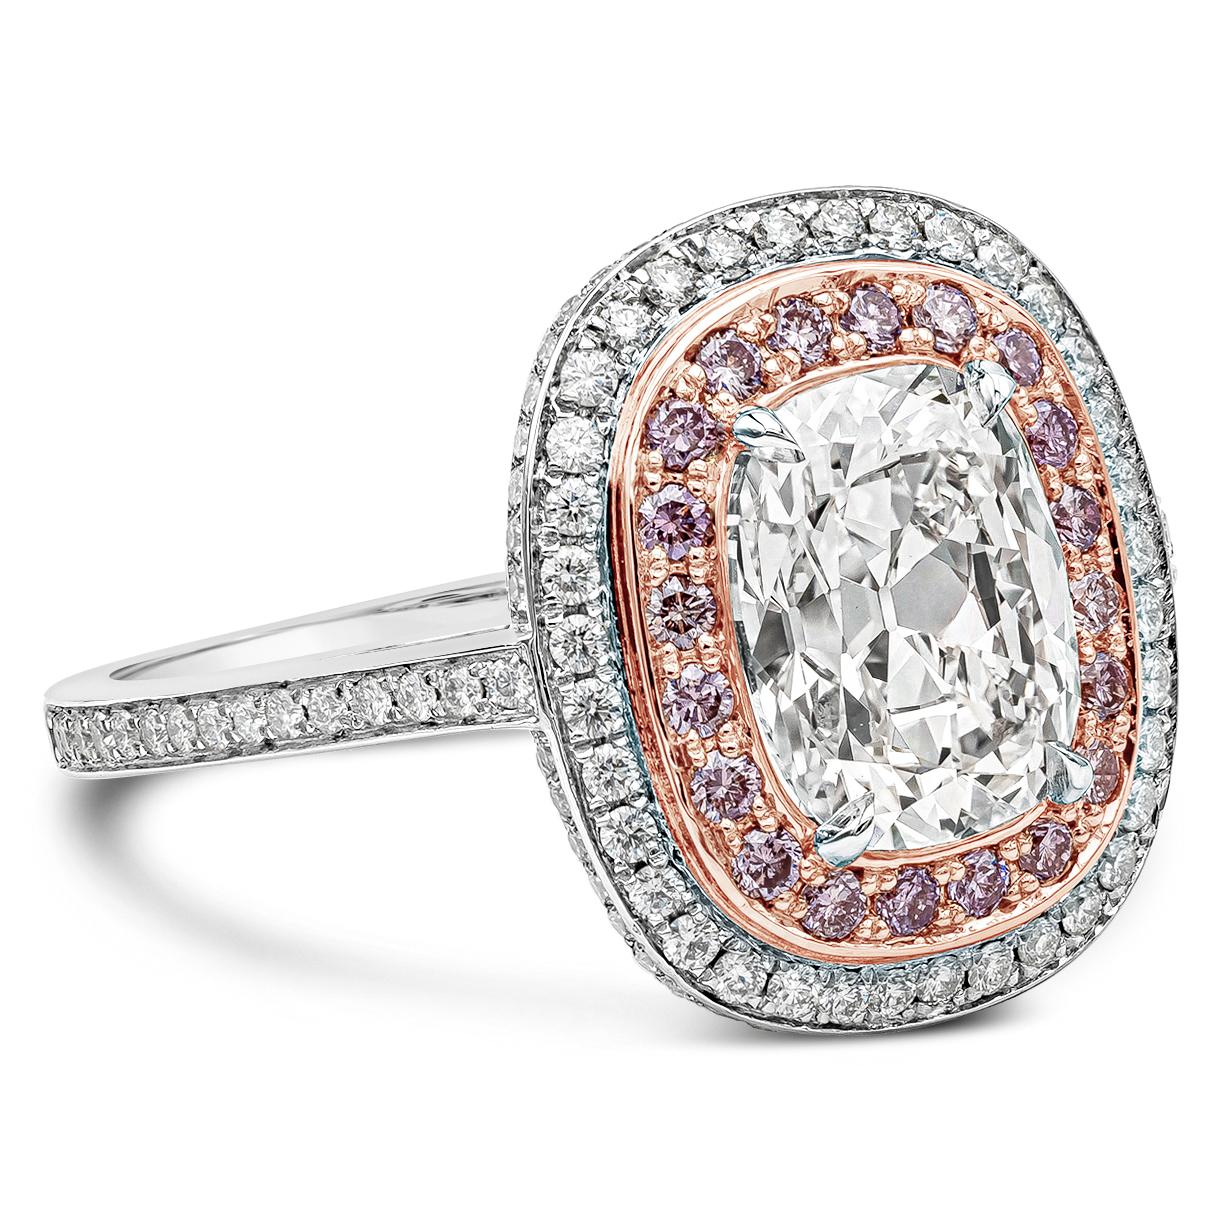 A well-crafted engagement ring style showcasing a 2.09 carats cushion cut diamond certified by GIA as E color and VVS2 in clarity. Surrounding the center diamond are round pink and white diamonds in a double halo setting. Shank is diamond encrusted